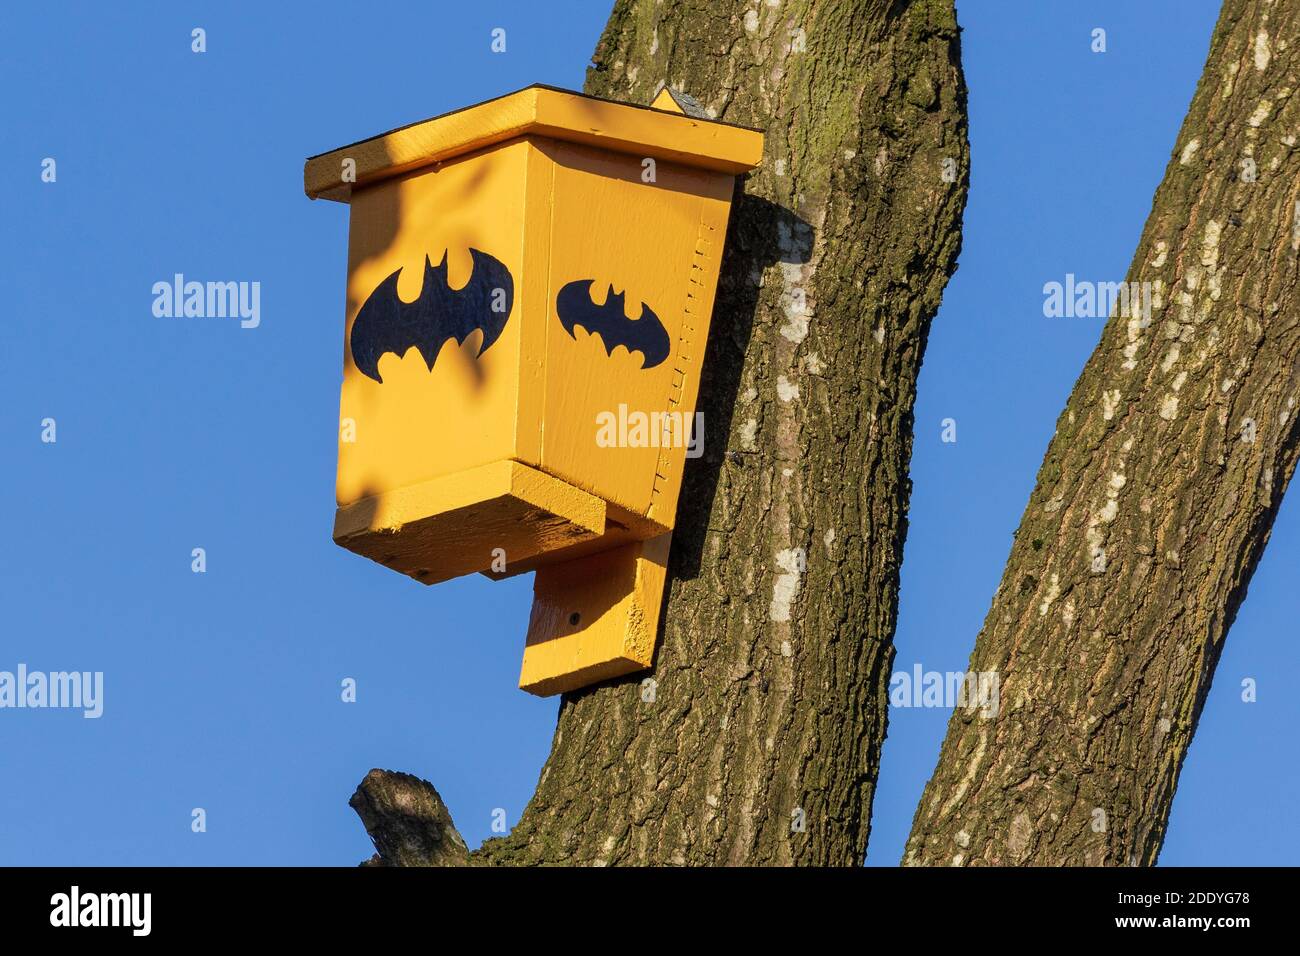 Home made box for bats to roost in on the side of a tree. Batbox Stock Photo